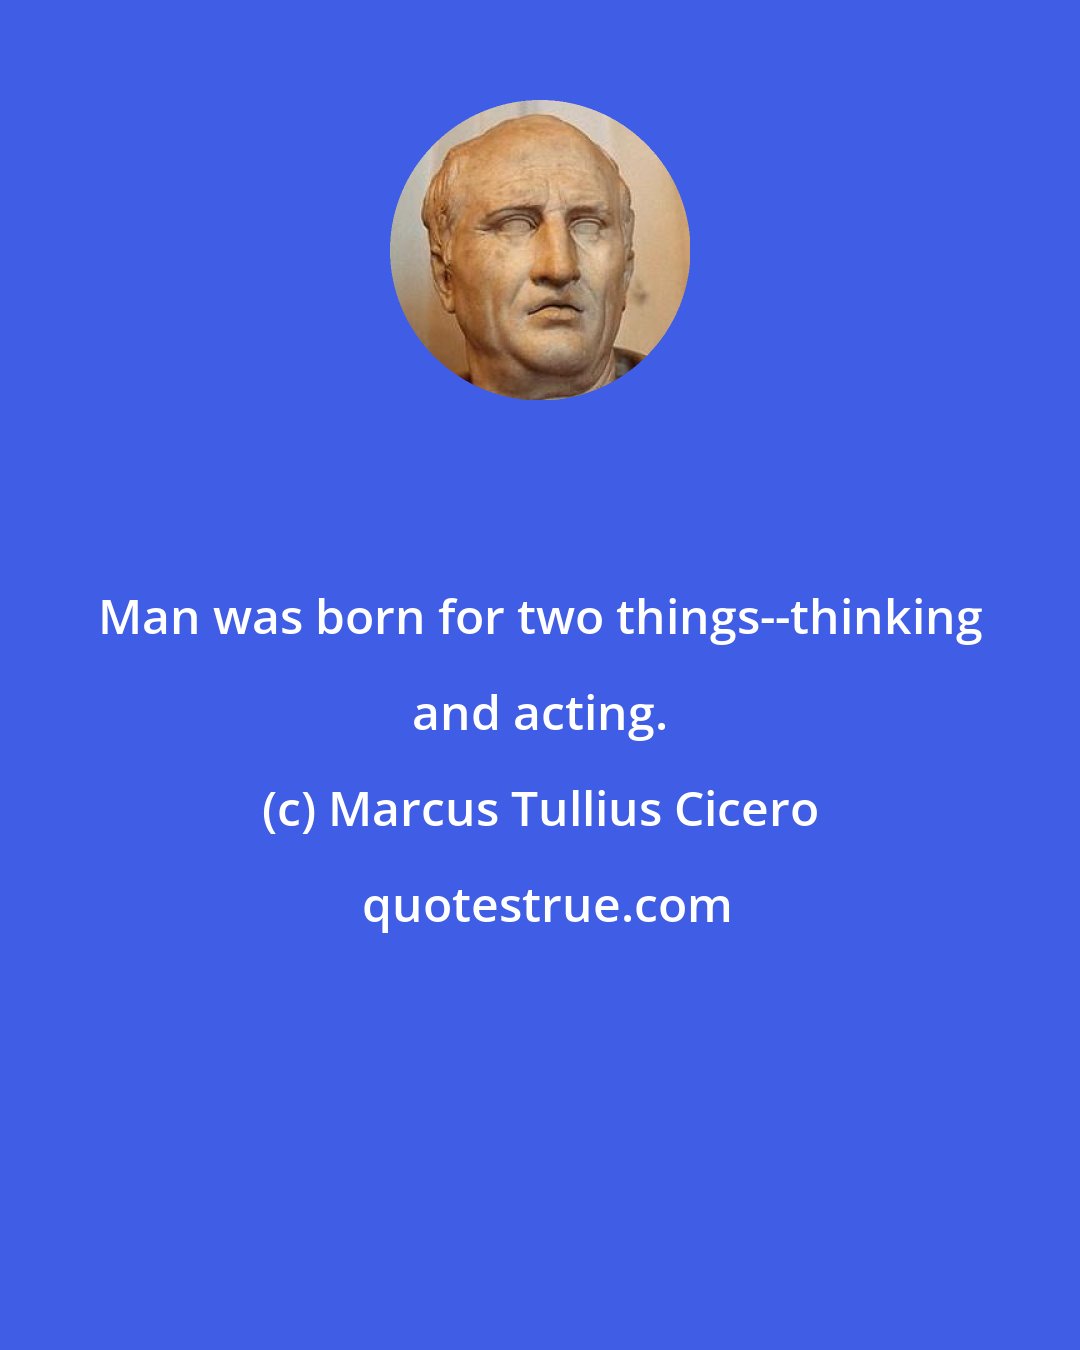 Marcus Tullius Cicero: Man was born for two things--thinking and acting.